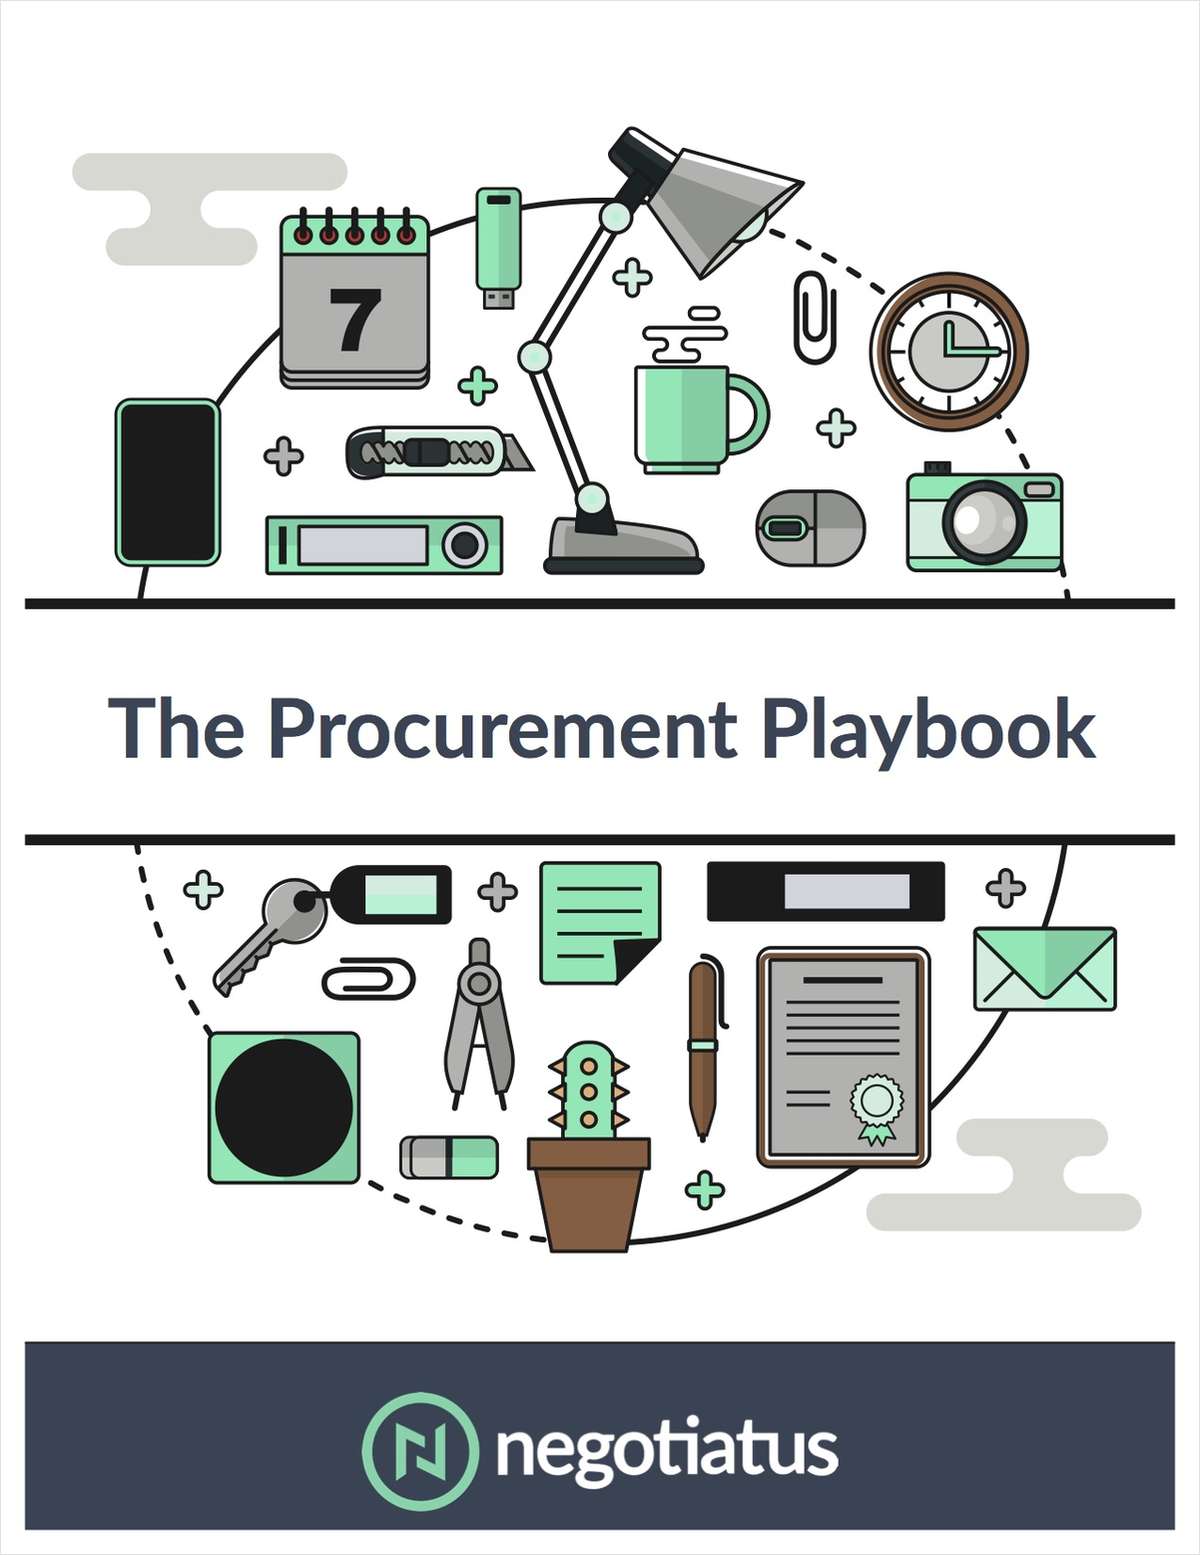 The Procurement Playbook: How to Manage Office Supply Purchasing